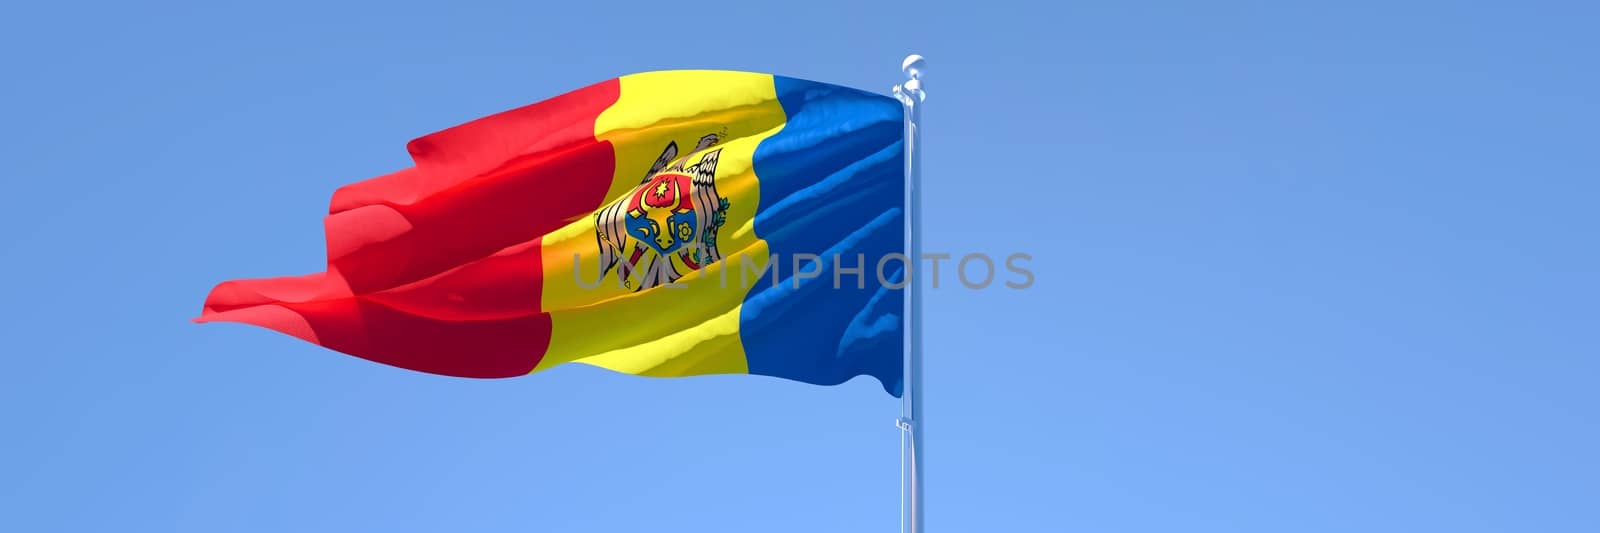 3D rendering of the national flag of Moldavia waving in the wind against a blue sky